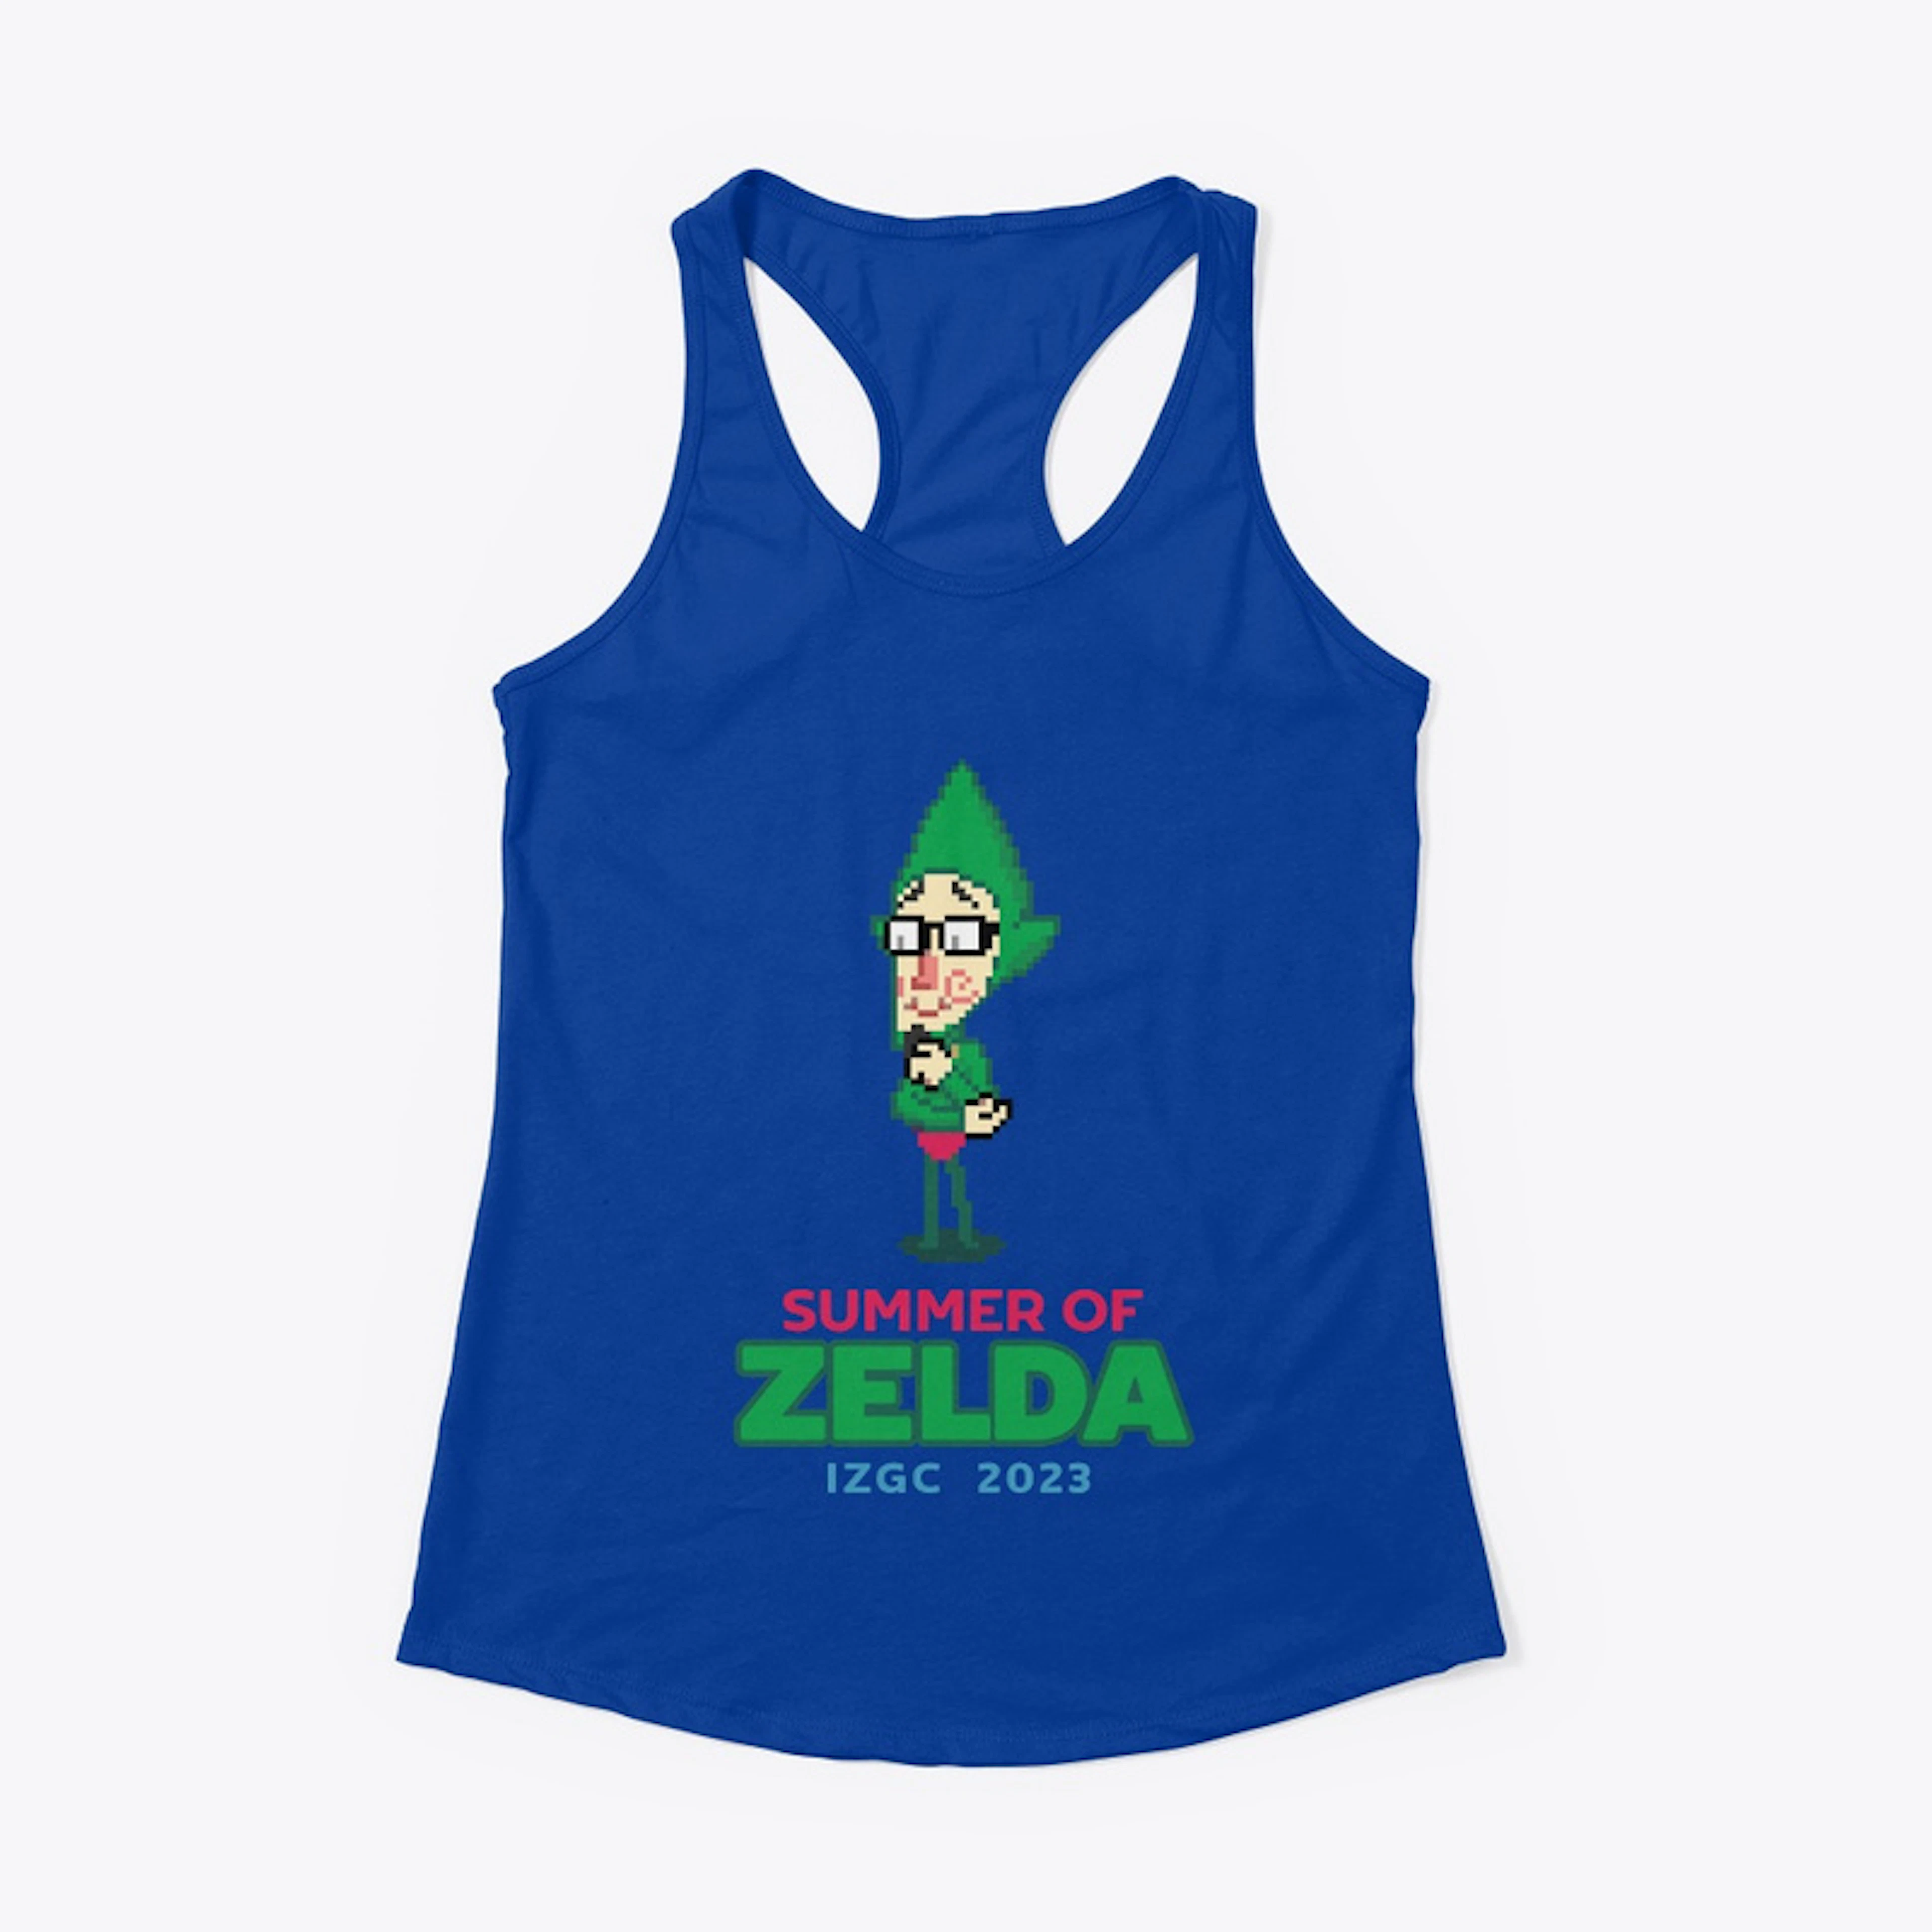 Summer of Z - Tingle Edition